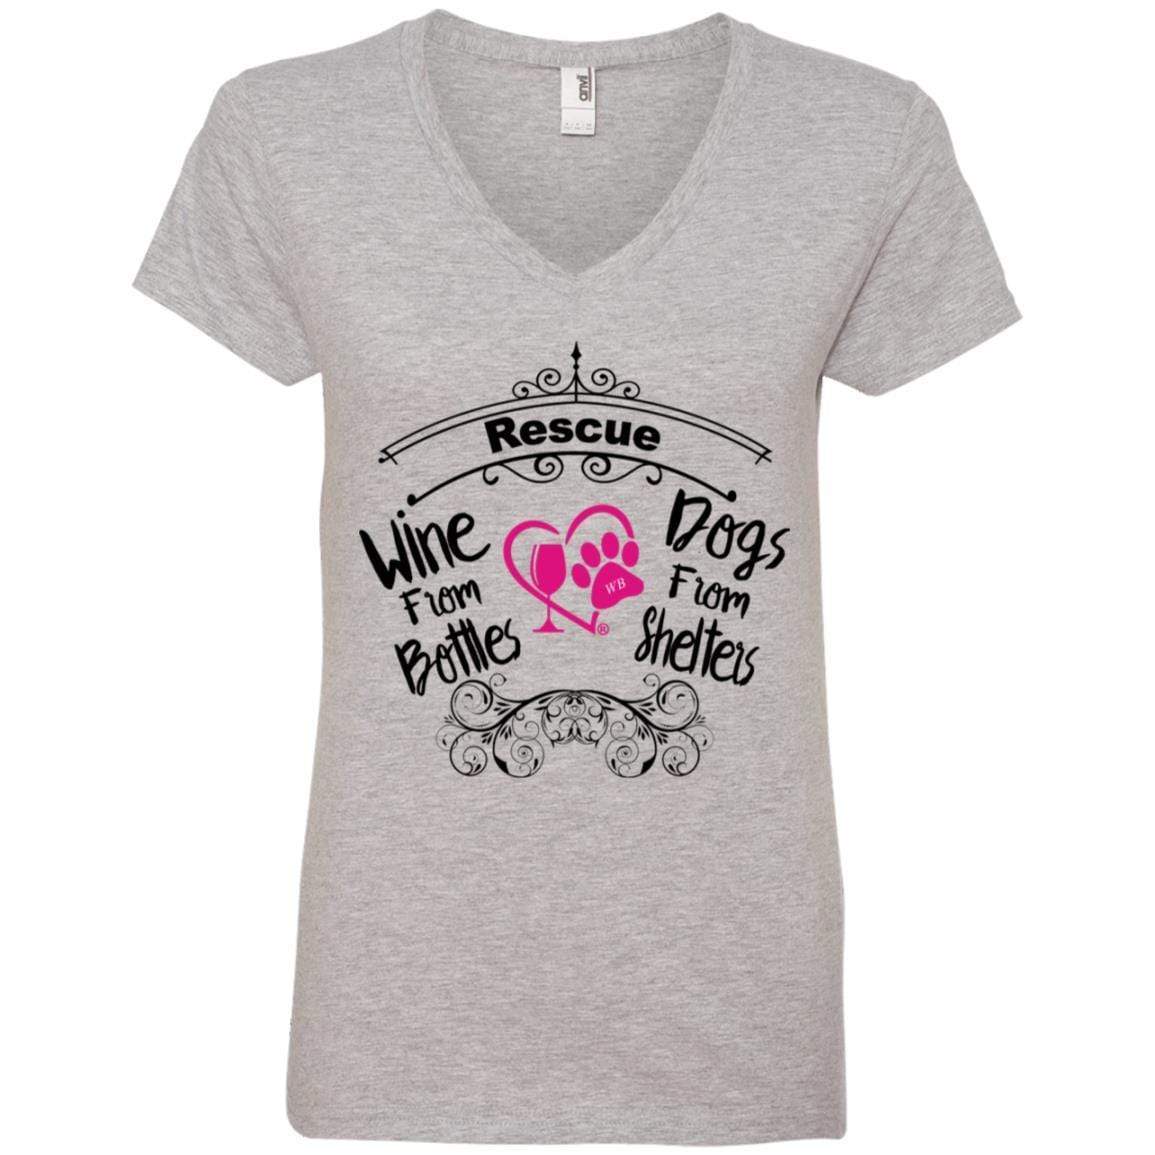 T-Shirts Heather Grey / S Winey Bitches Co "I Rescue Wine From Bottles & Dog From Shelters" Ladies' V-Neck T-Shirt WineyBitchesCo